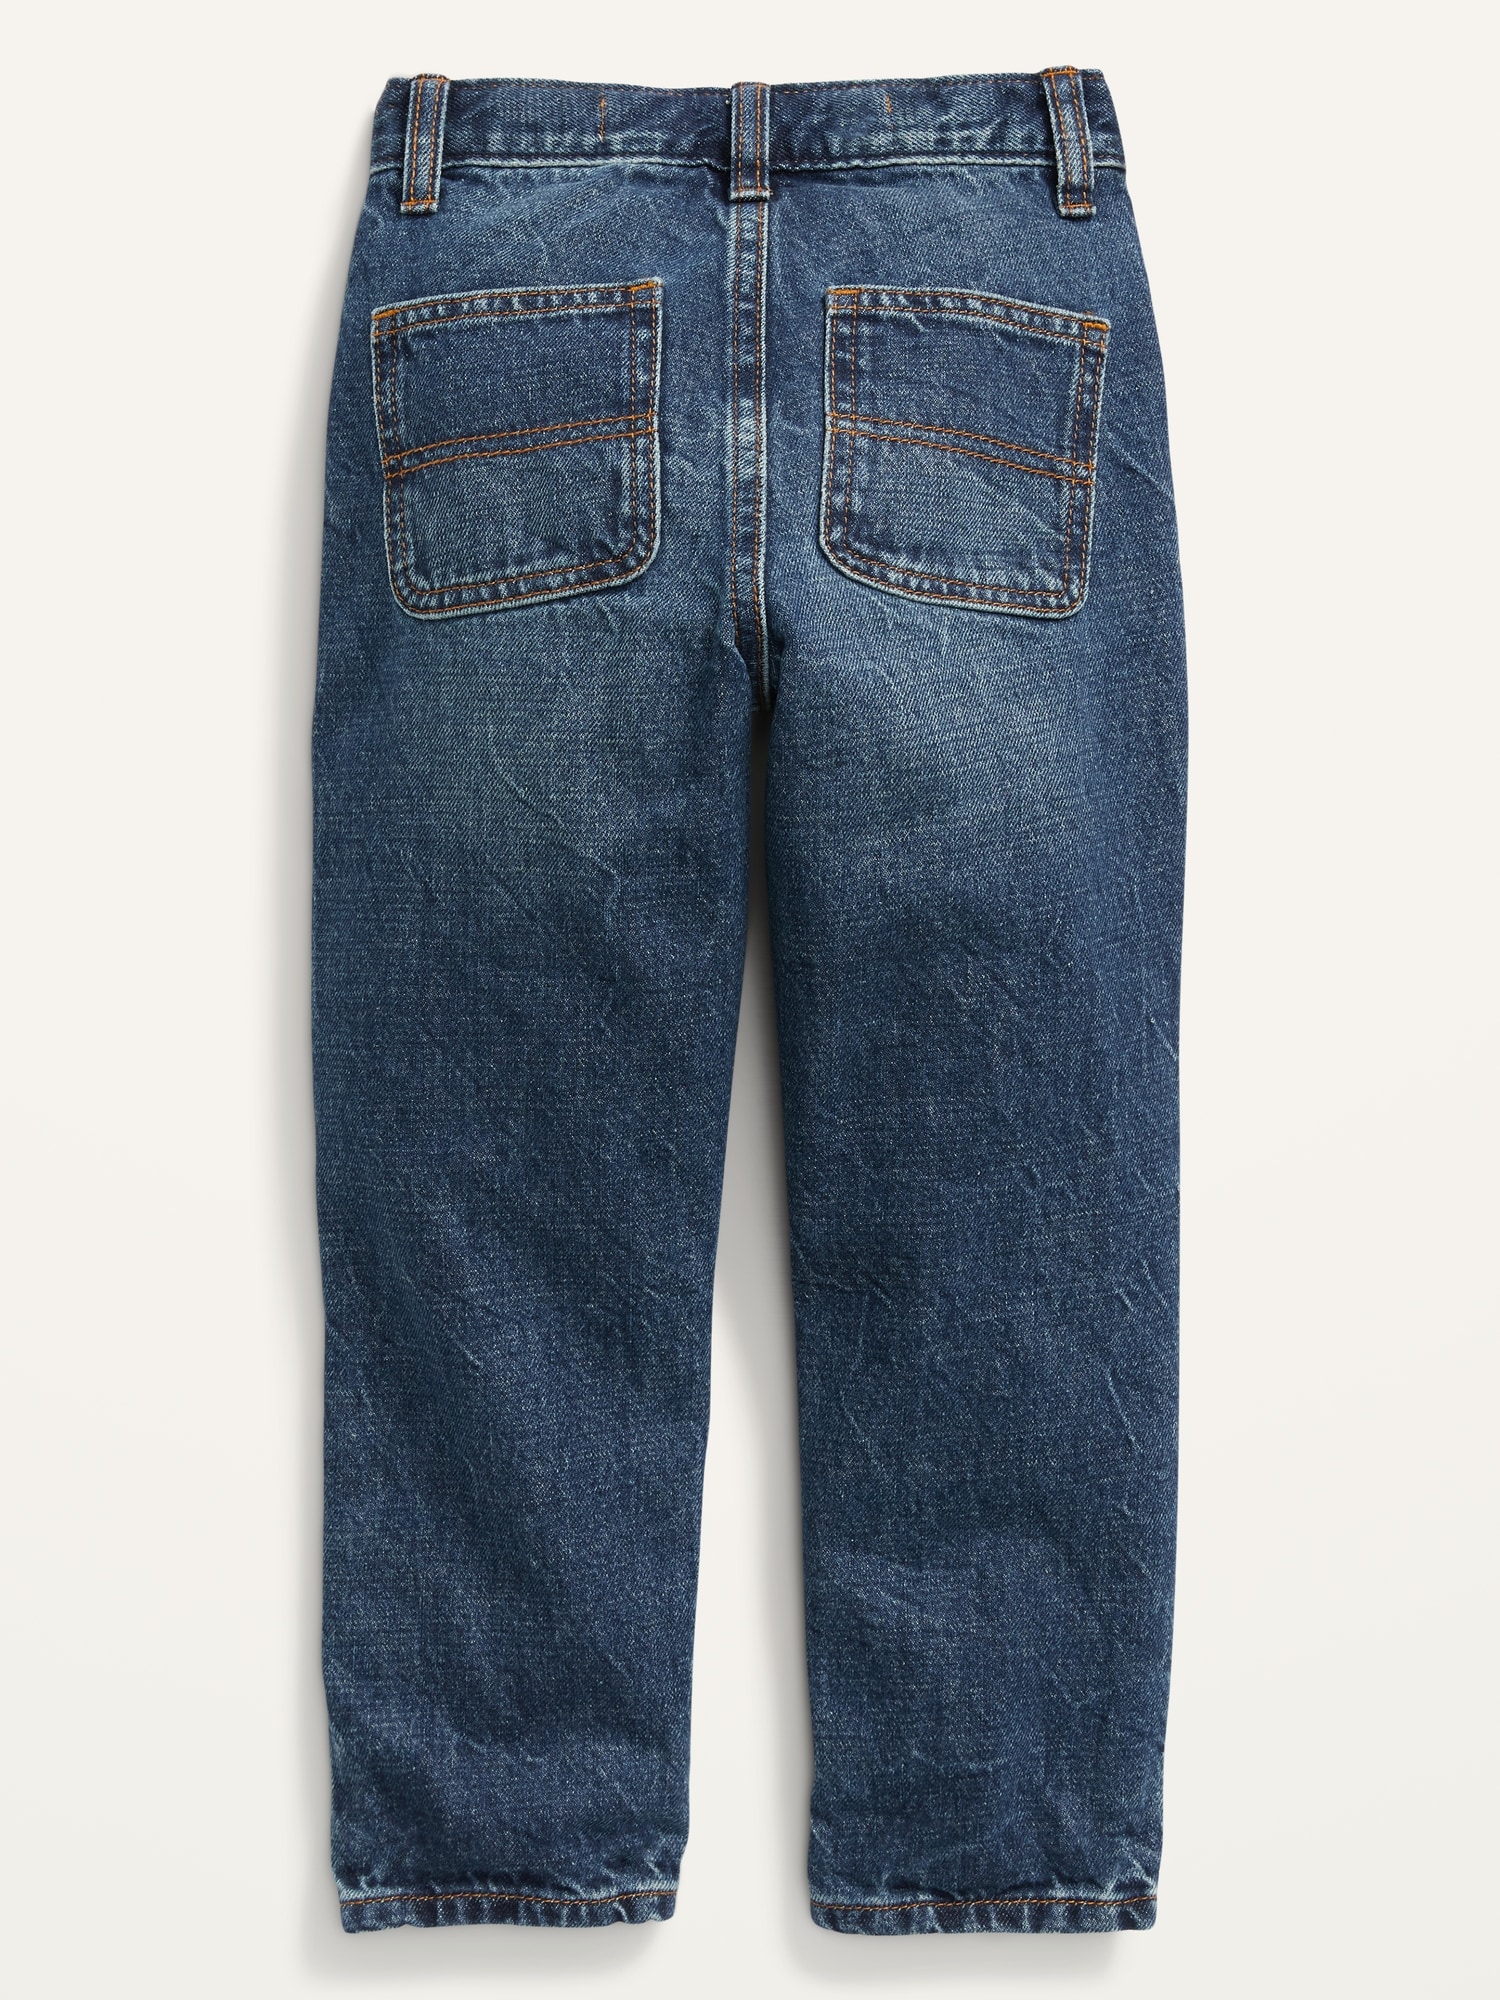 Unisex Loose Non-Stretch Dark-Wash Jeans for Toddler | Old Navy